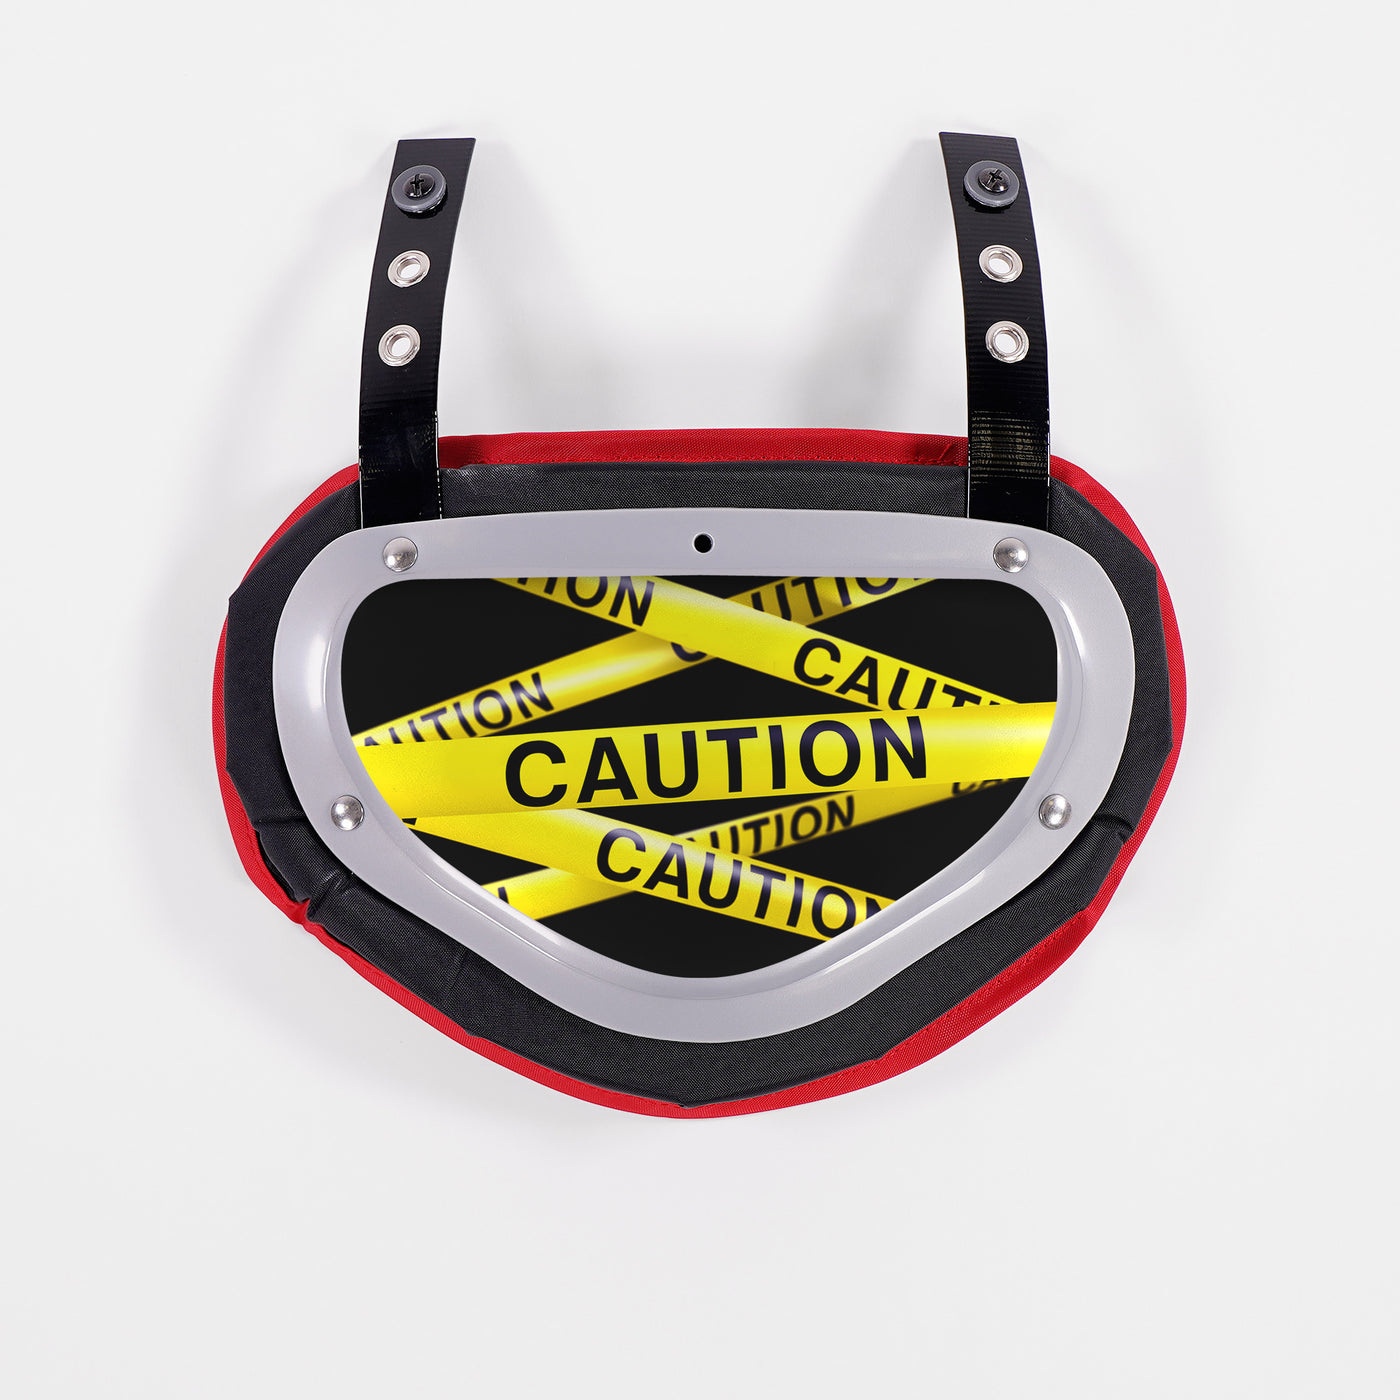 Caution Tape Sticker for Back Plate